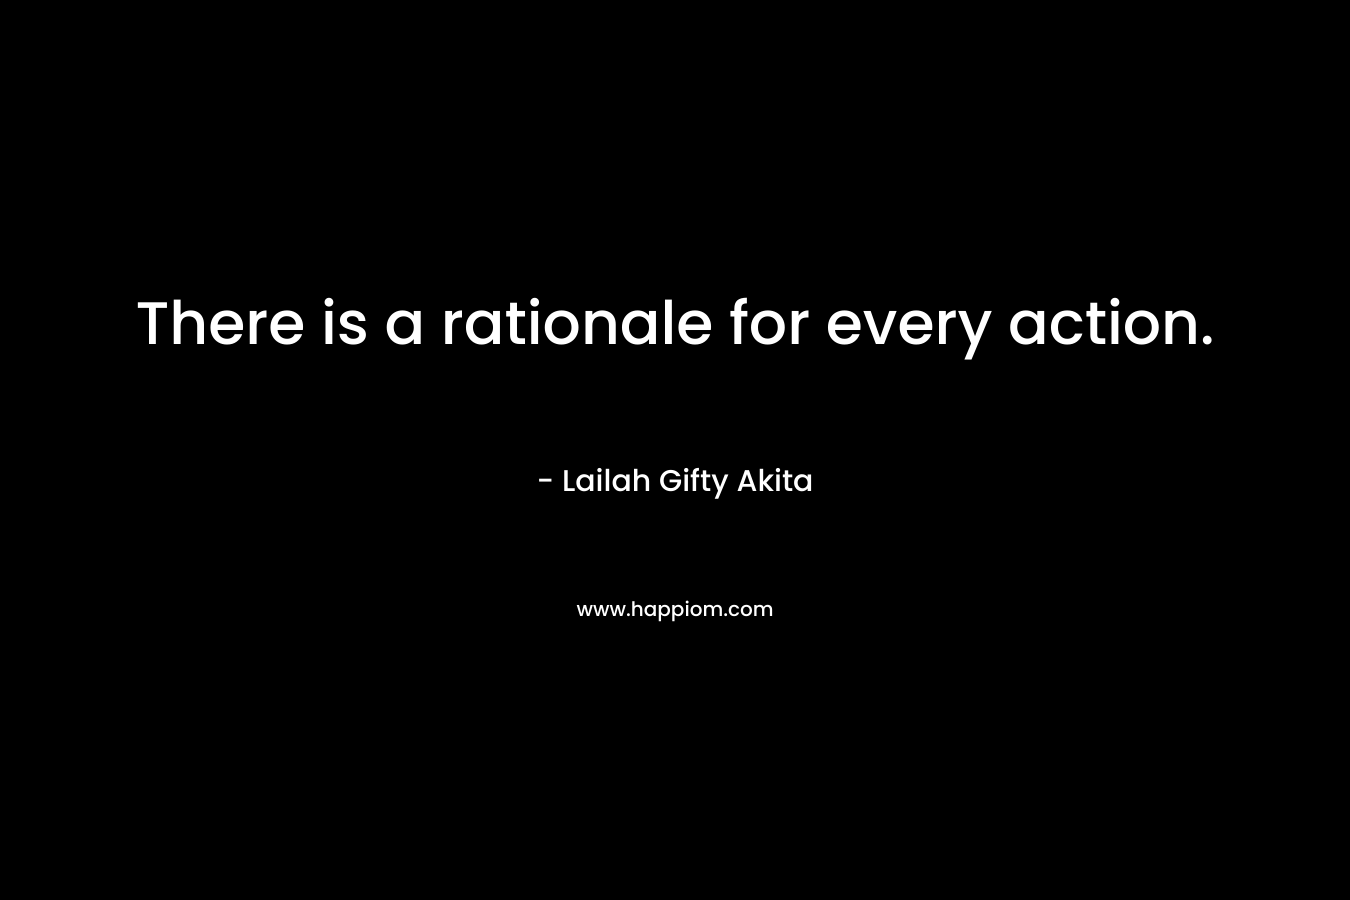 There is a rationale for every action.